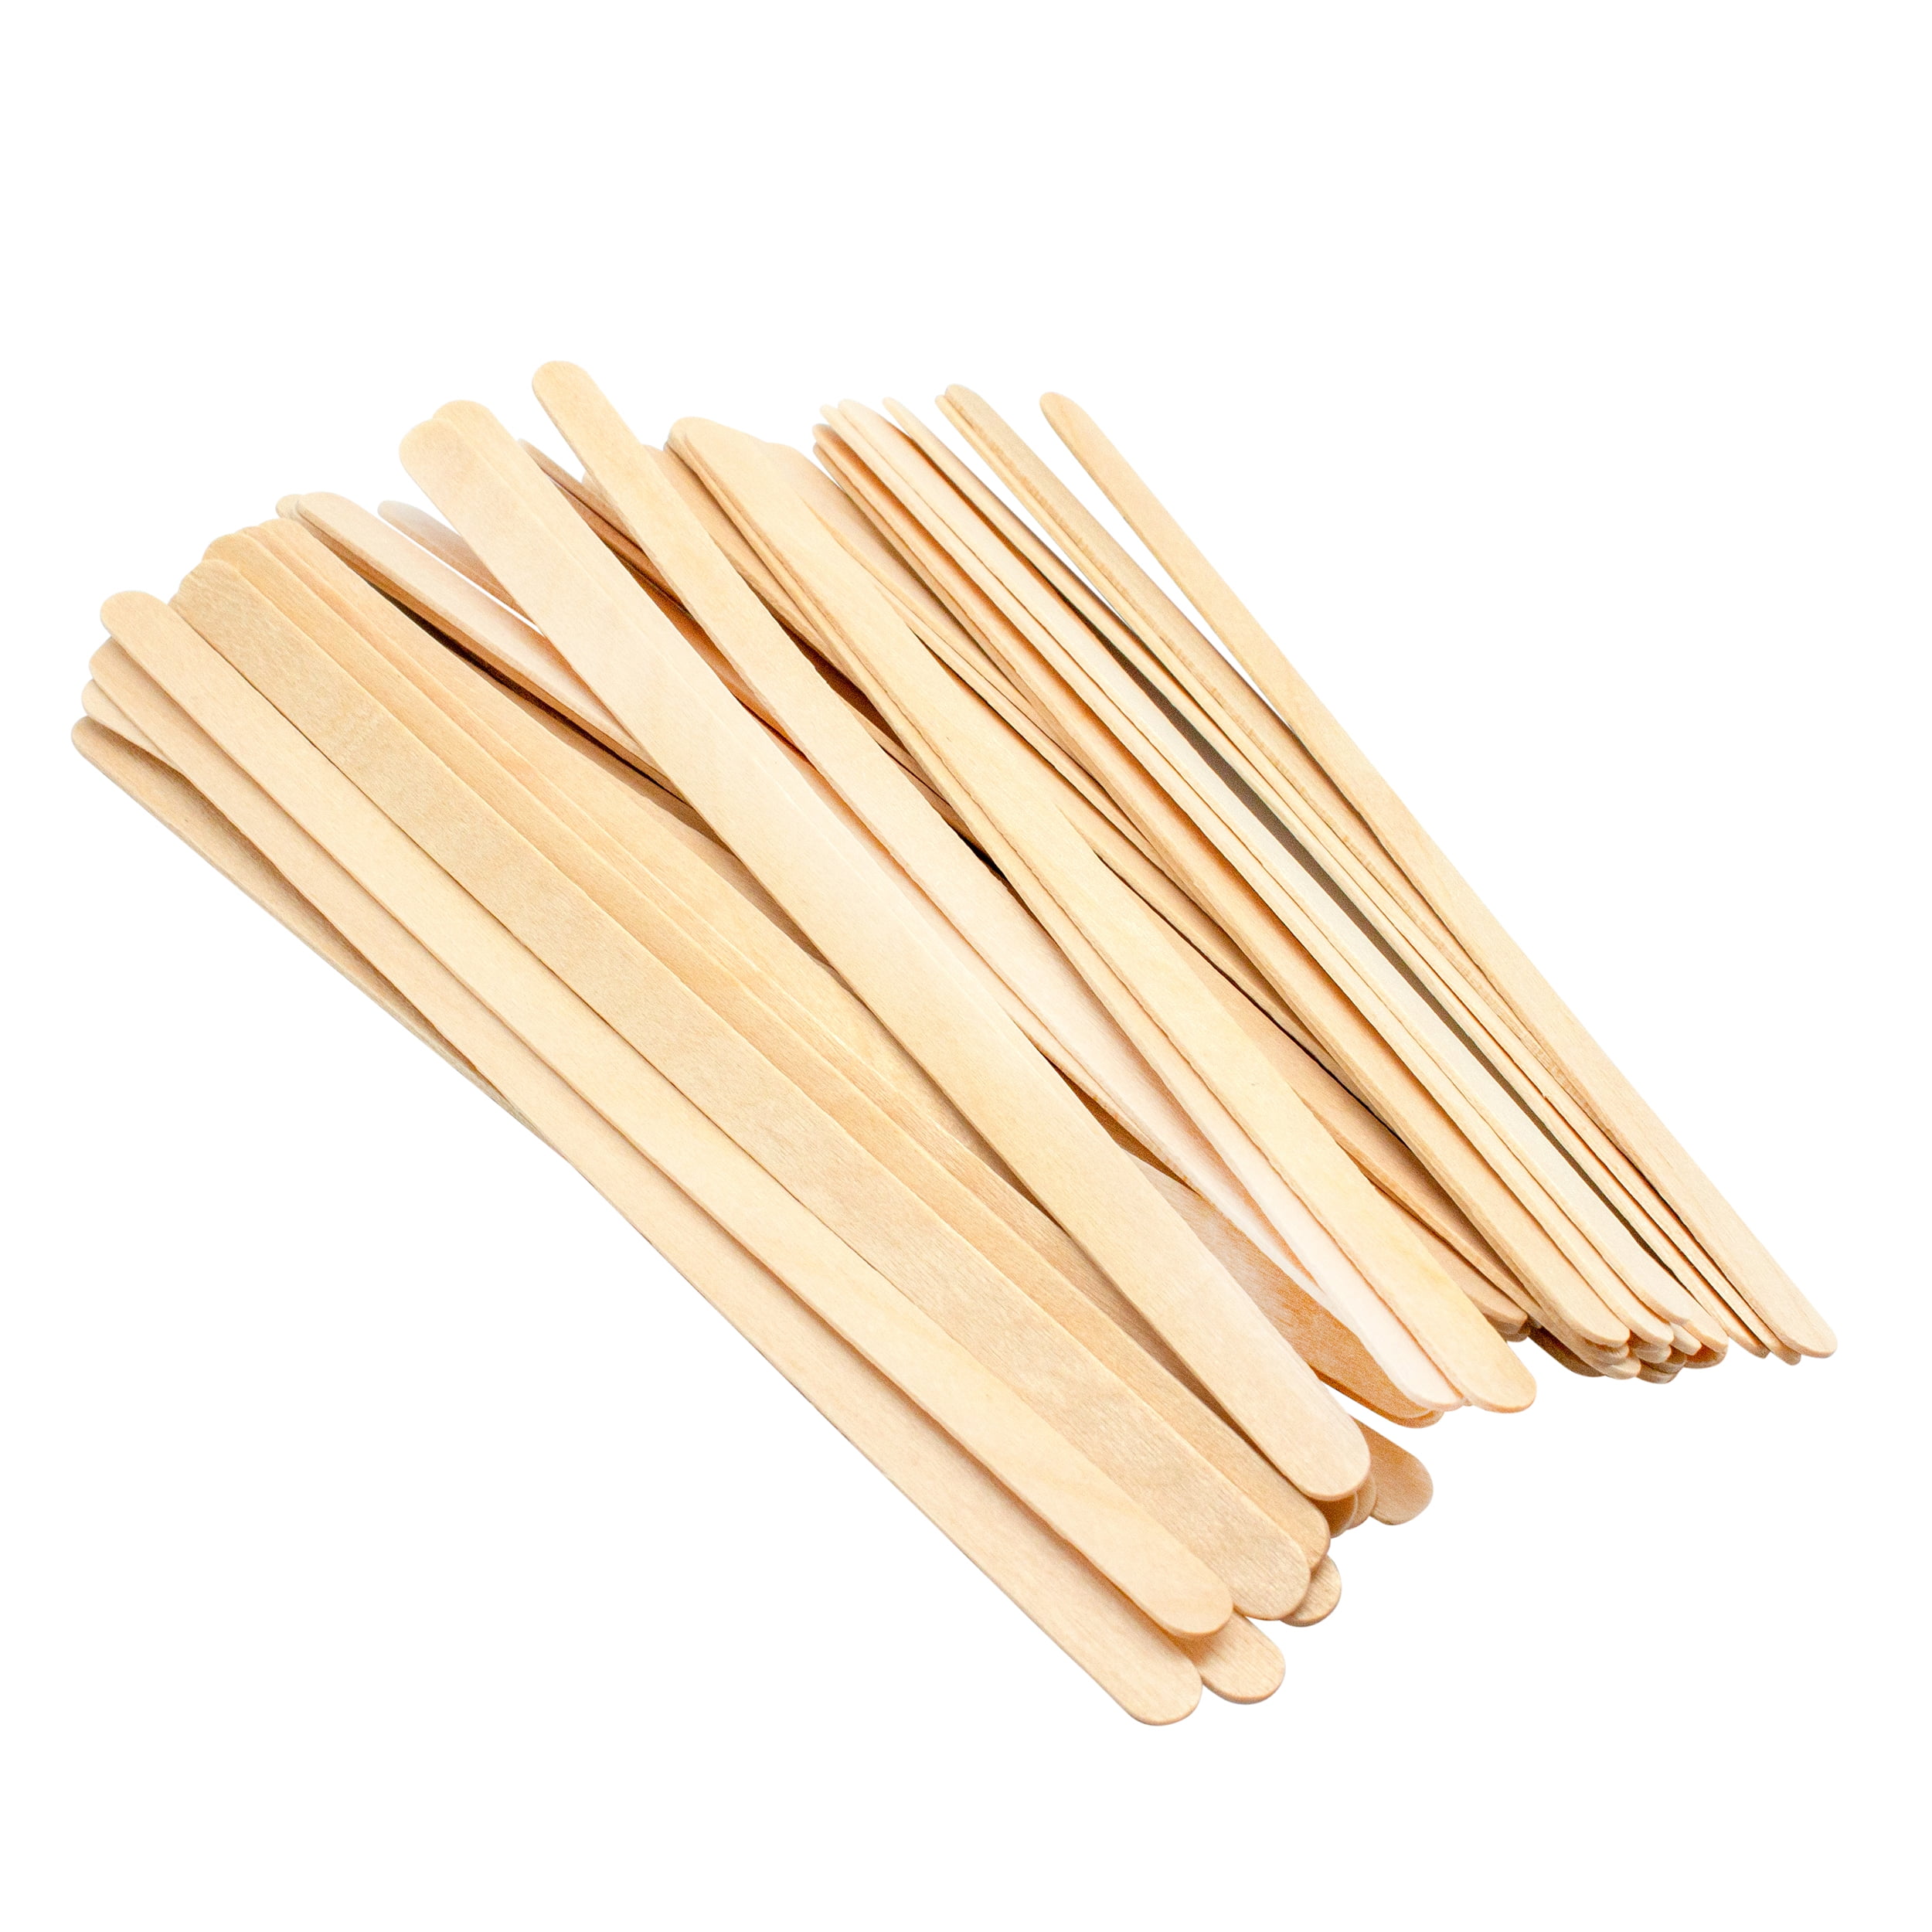 Blue Top Individually Paper Wrapped Wooden Coffee Stirrers 4.3 inch Pack 500, Disposable Wood Sticks for Coffee/Tea/Hot Beverage/Hot Chocolate/Cold